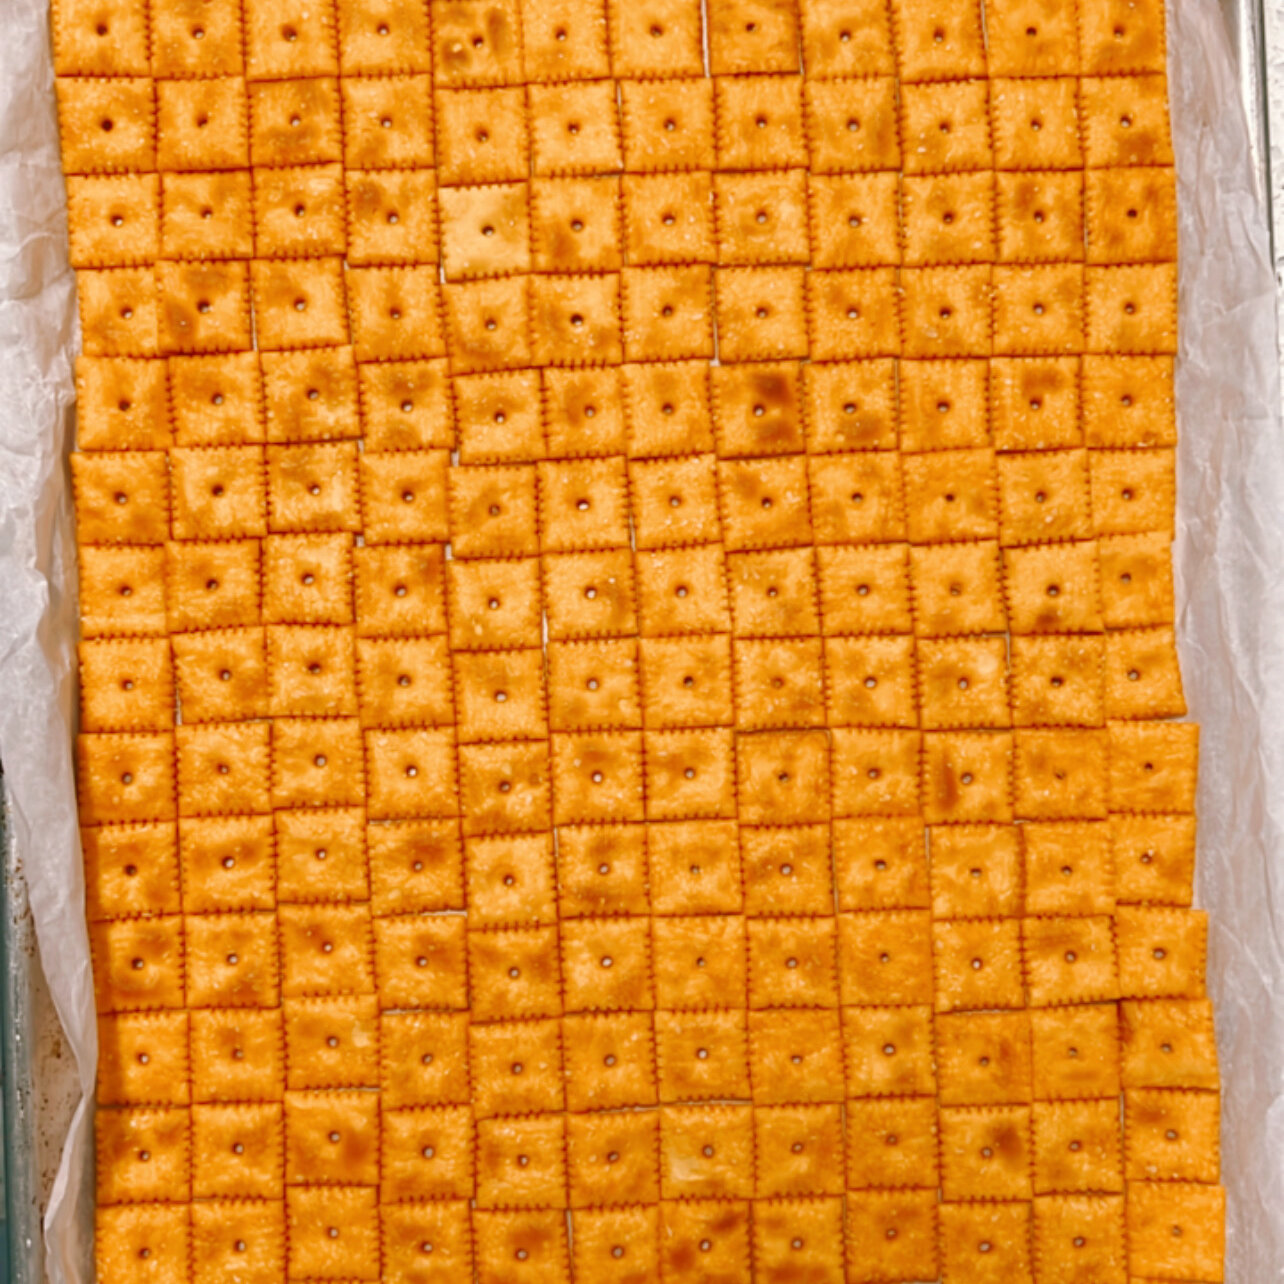 Regular Cheez-Its arranged on a parchment-lined rimmed baking sheet